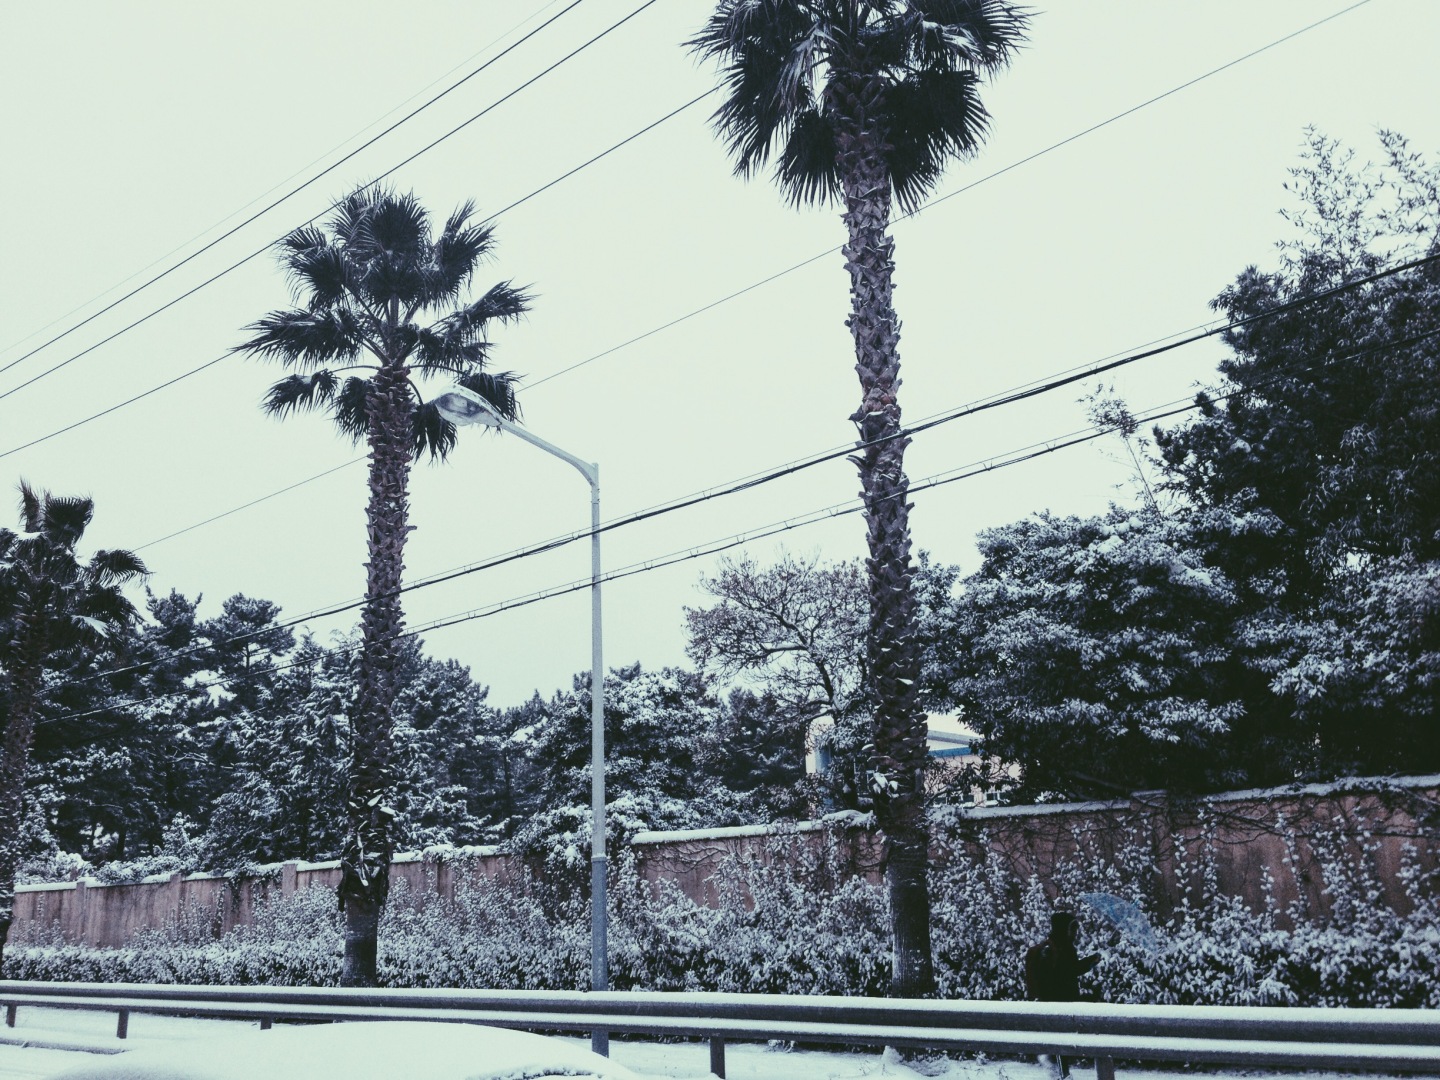 Icy white palm trees